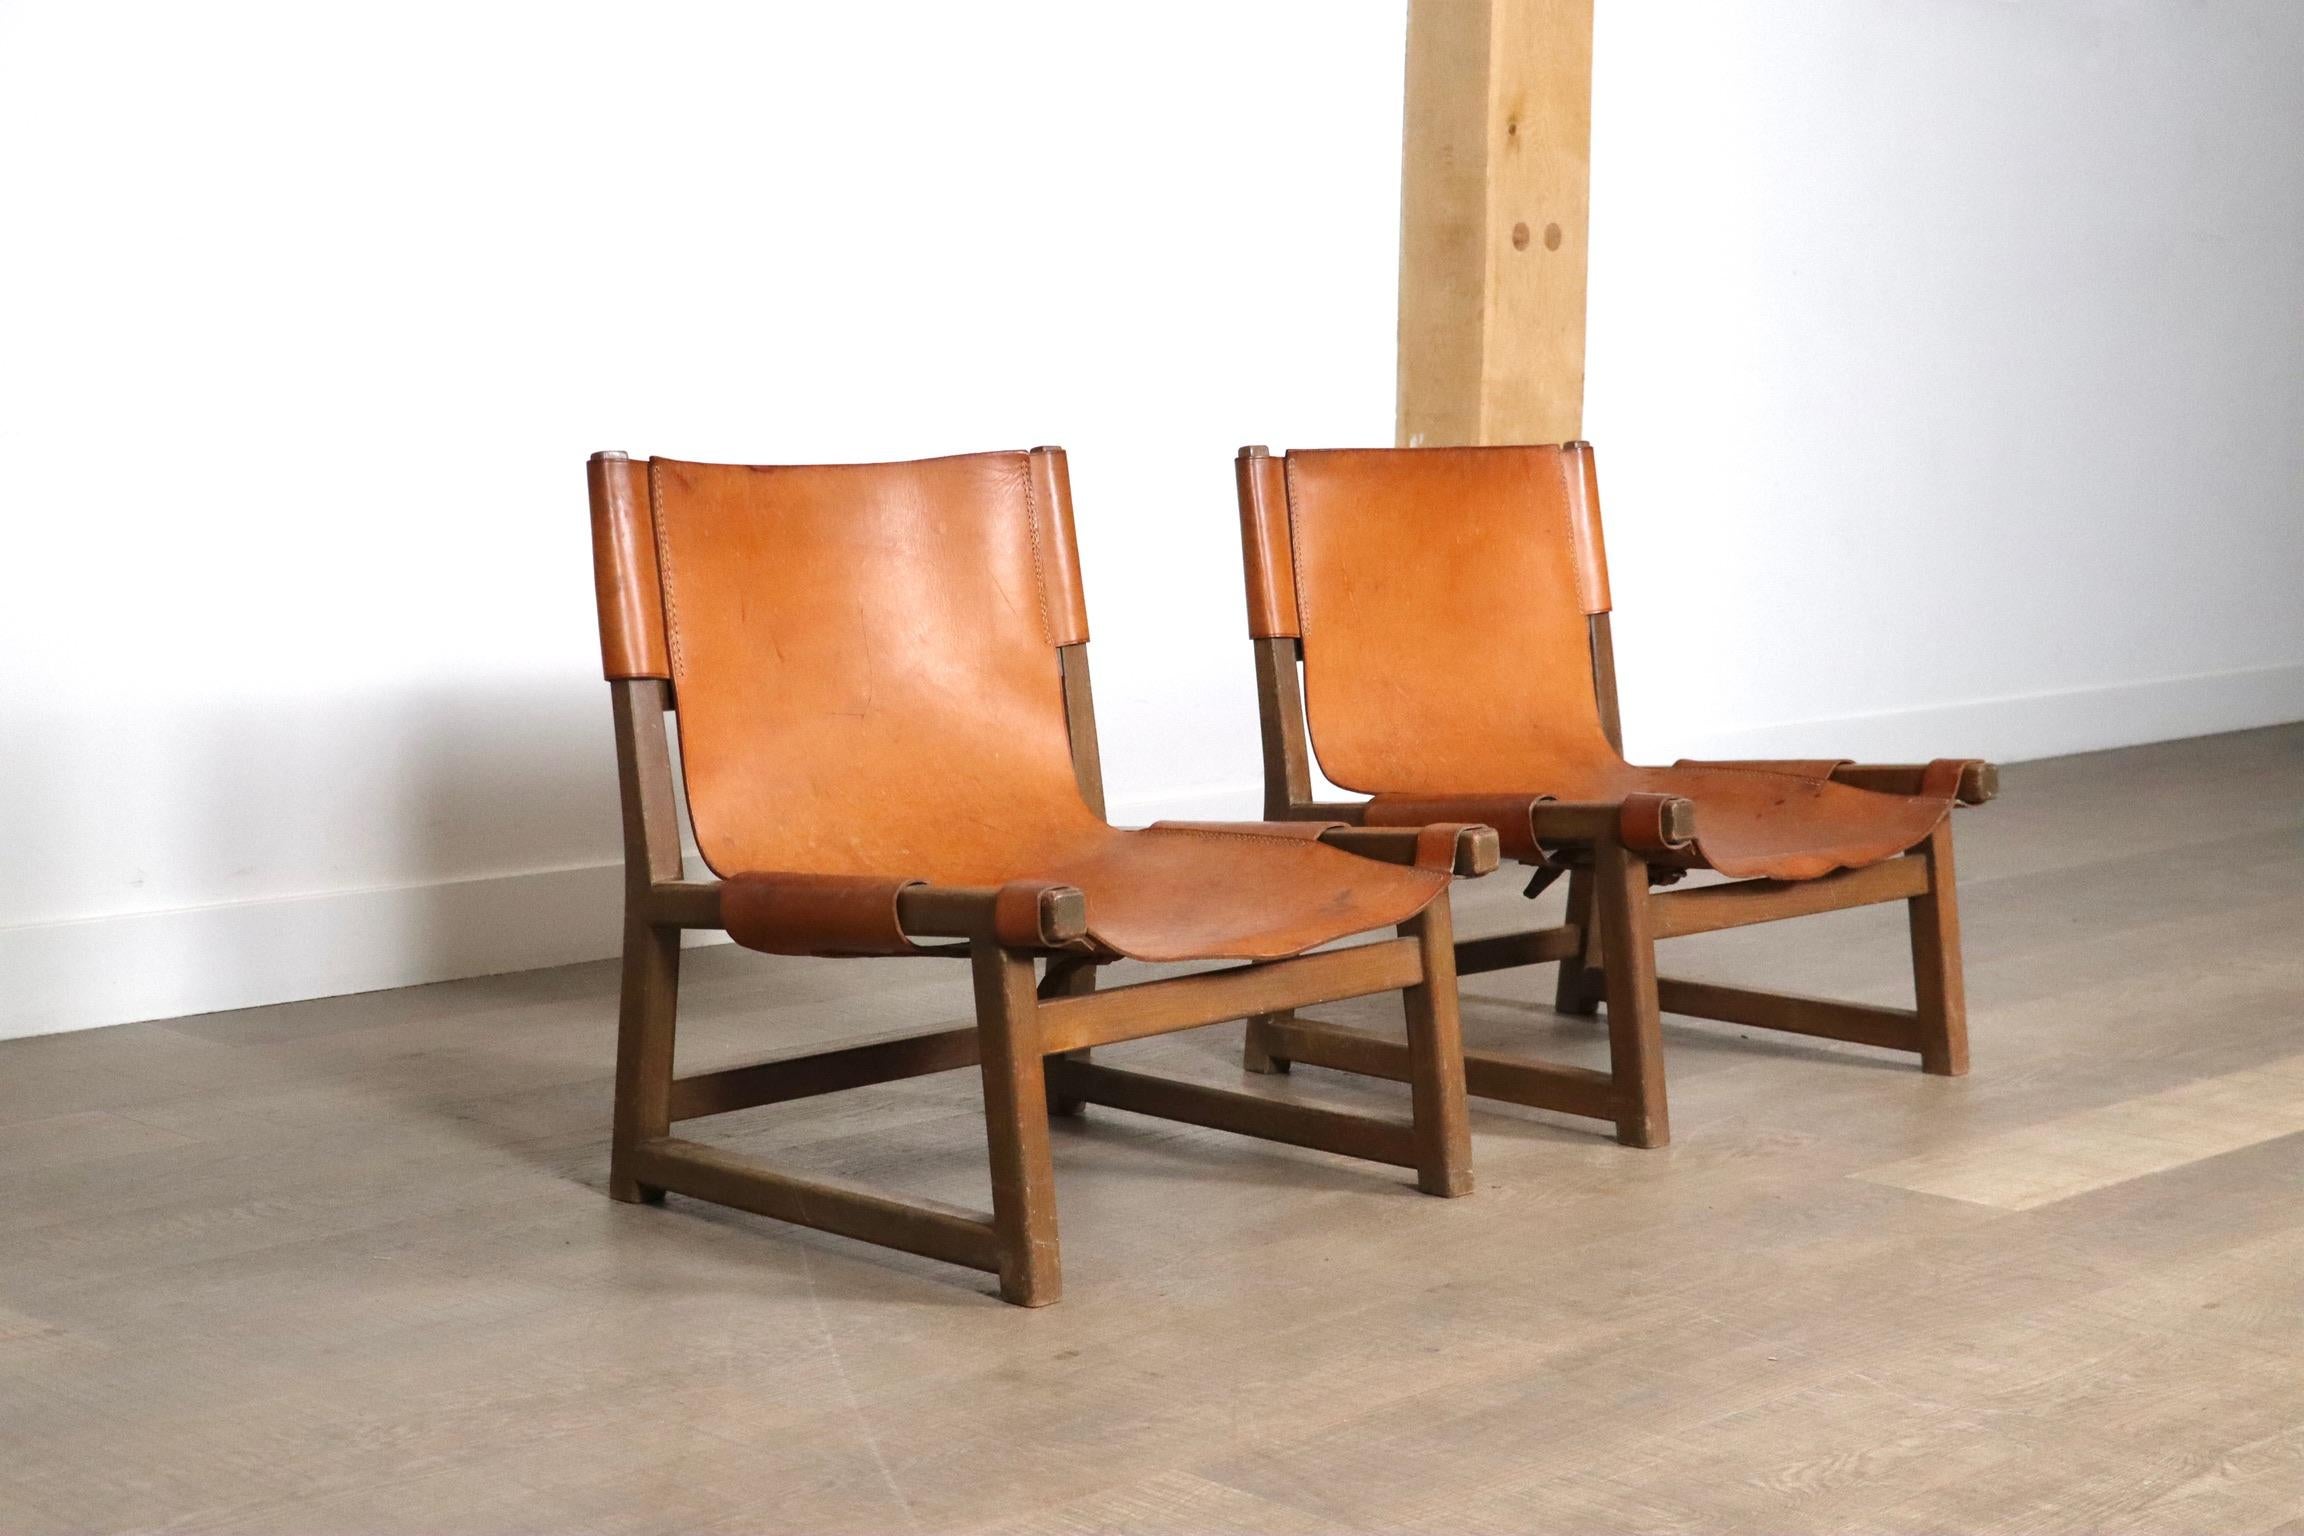 Pair Of Riaza Chairs In Cognac Leather By Paco Muñoz For Darro Gallery, Spain, 1 In Good Condition For Sale In ABCOUDE, UT